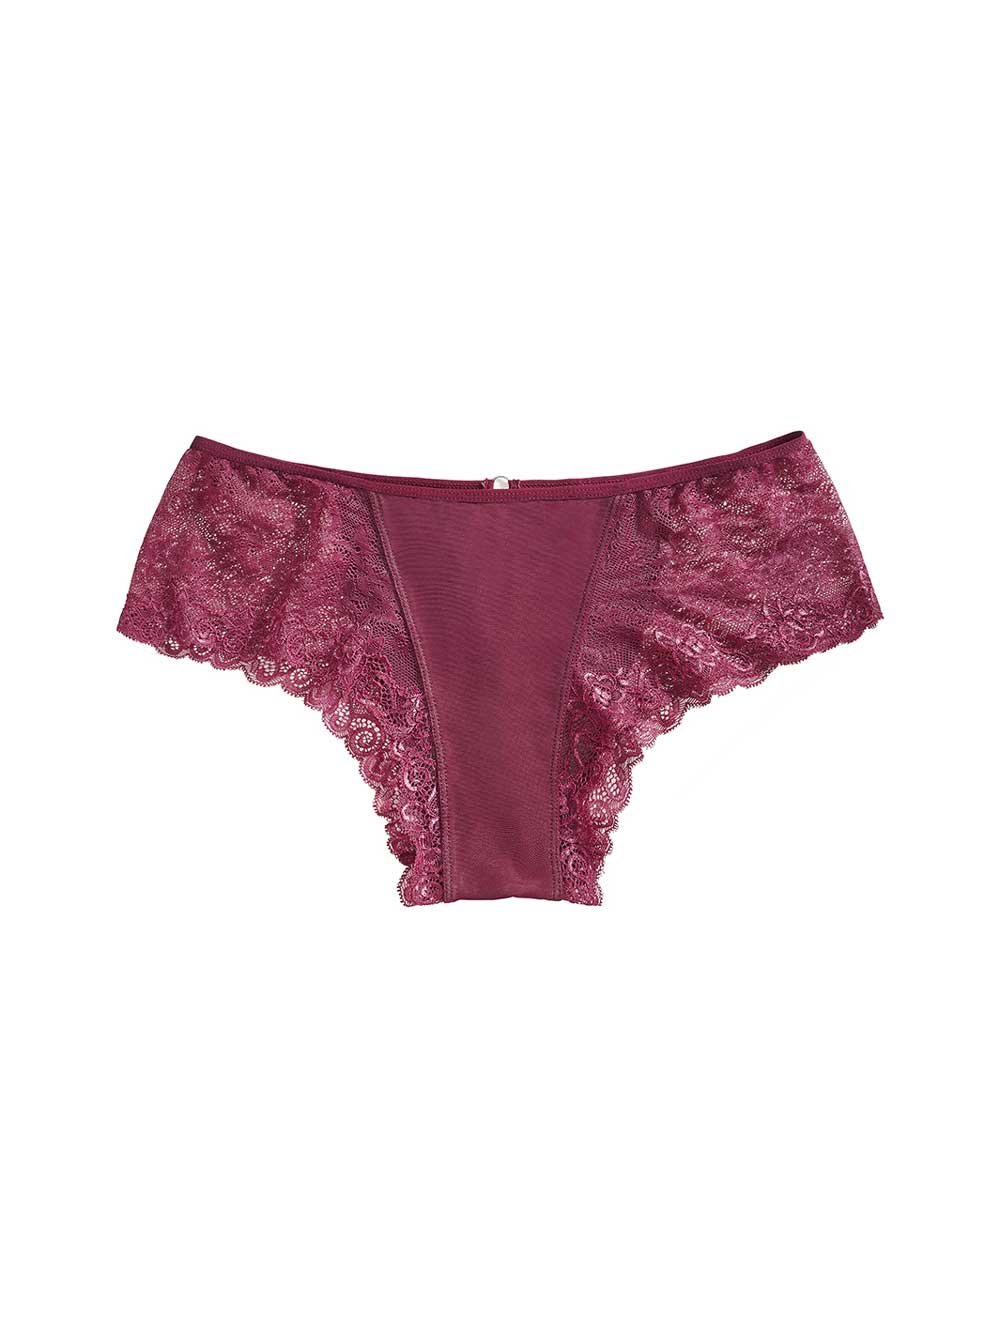 Francesca Full Coverage Lace Detail Panty